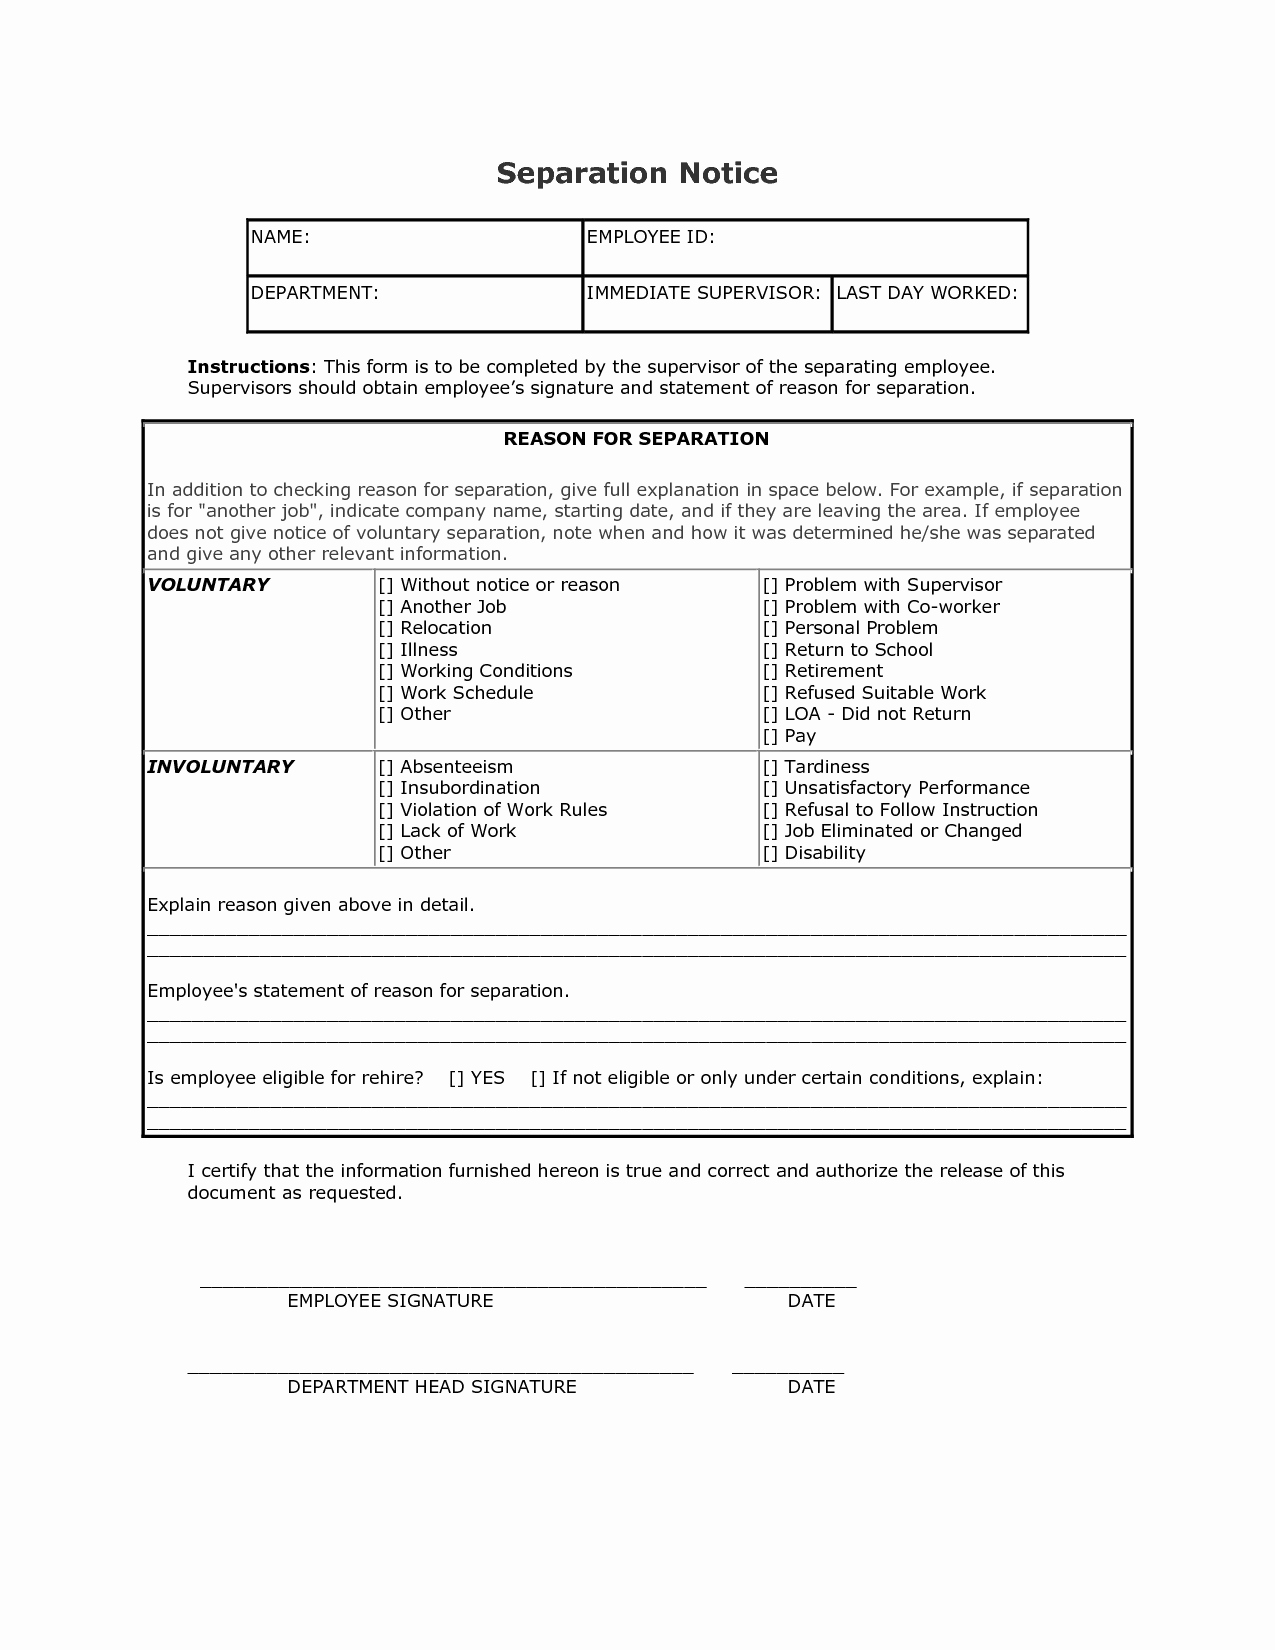 Employee Separation form Template Awesome 10 Best Of Separation Notice Template Employee